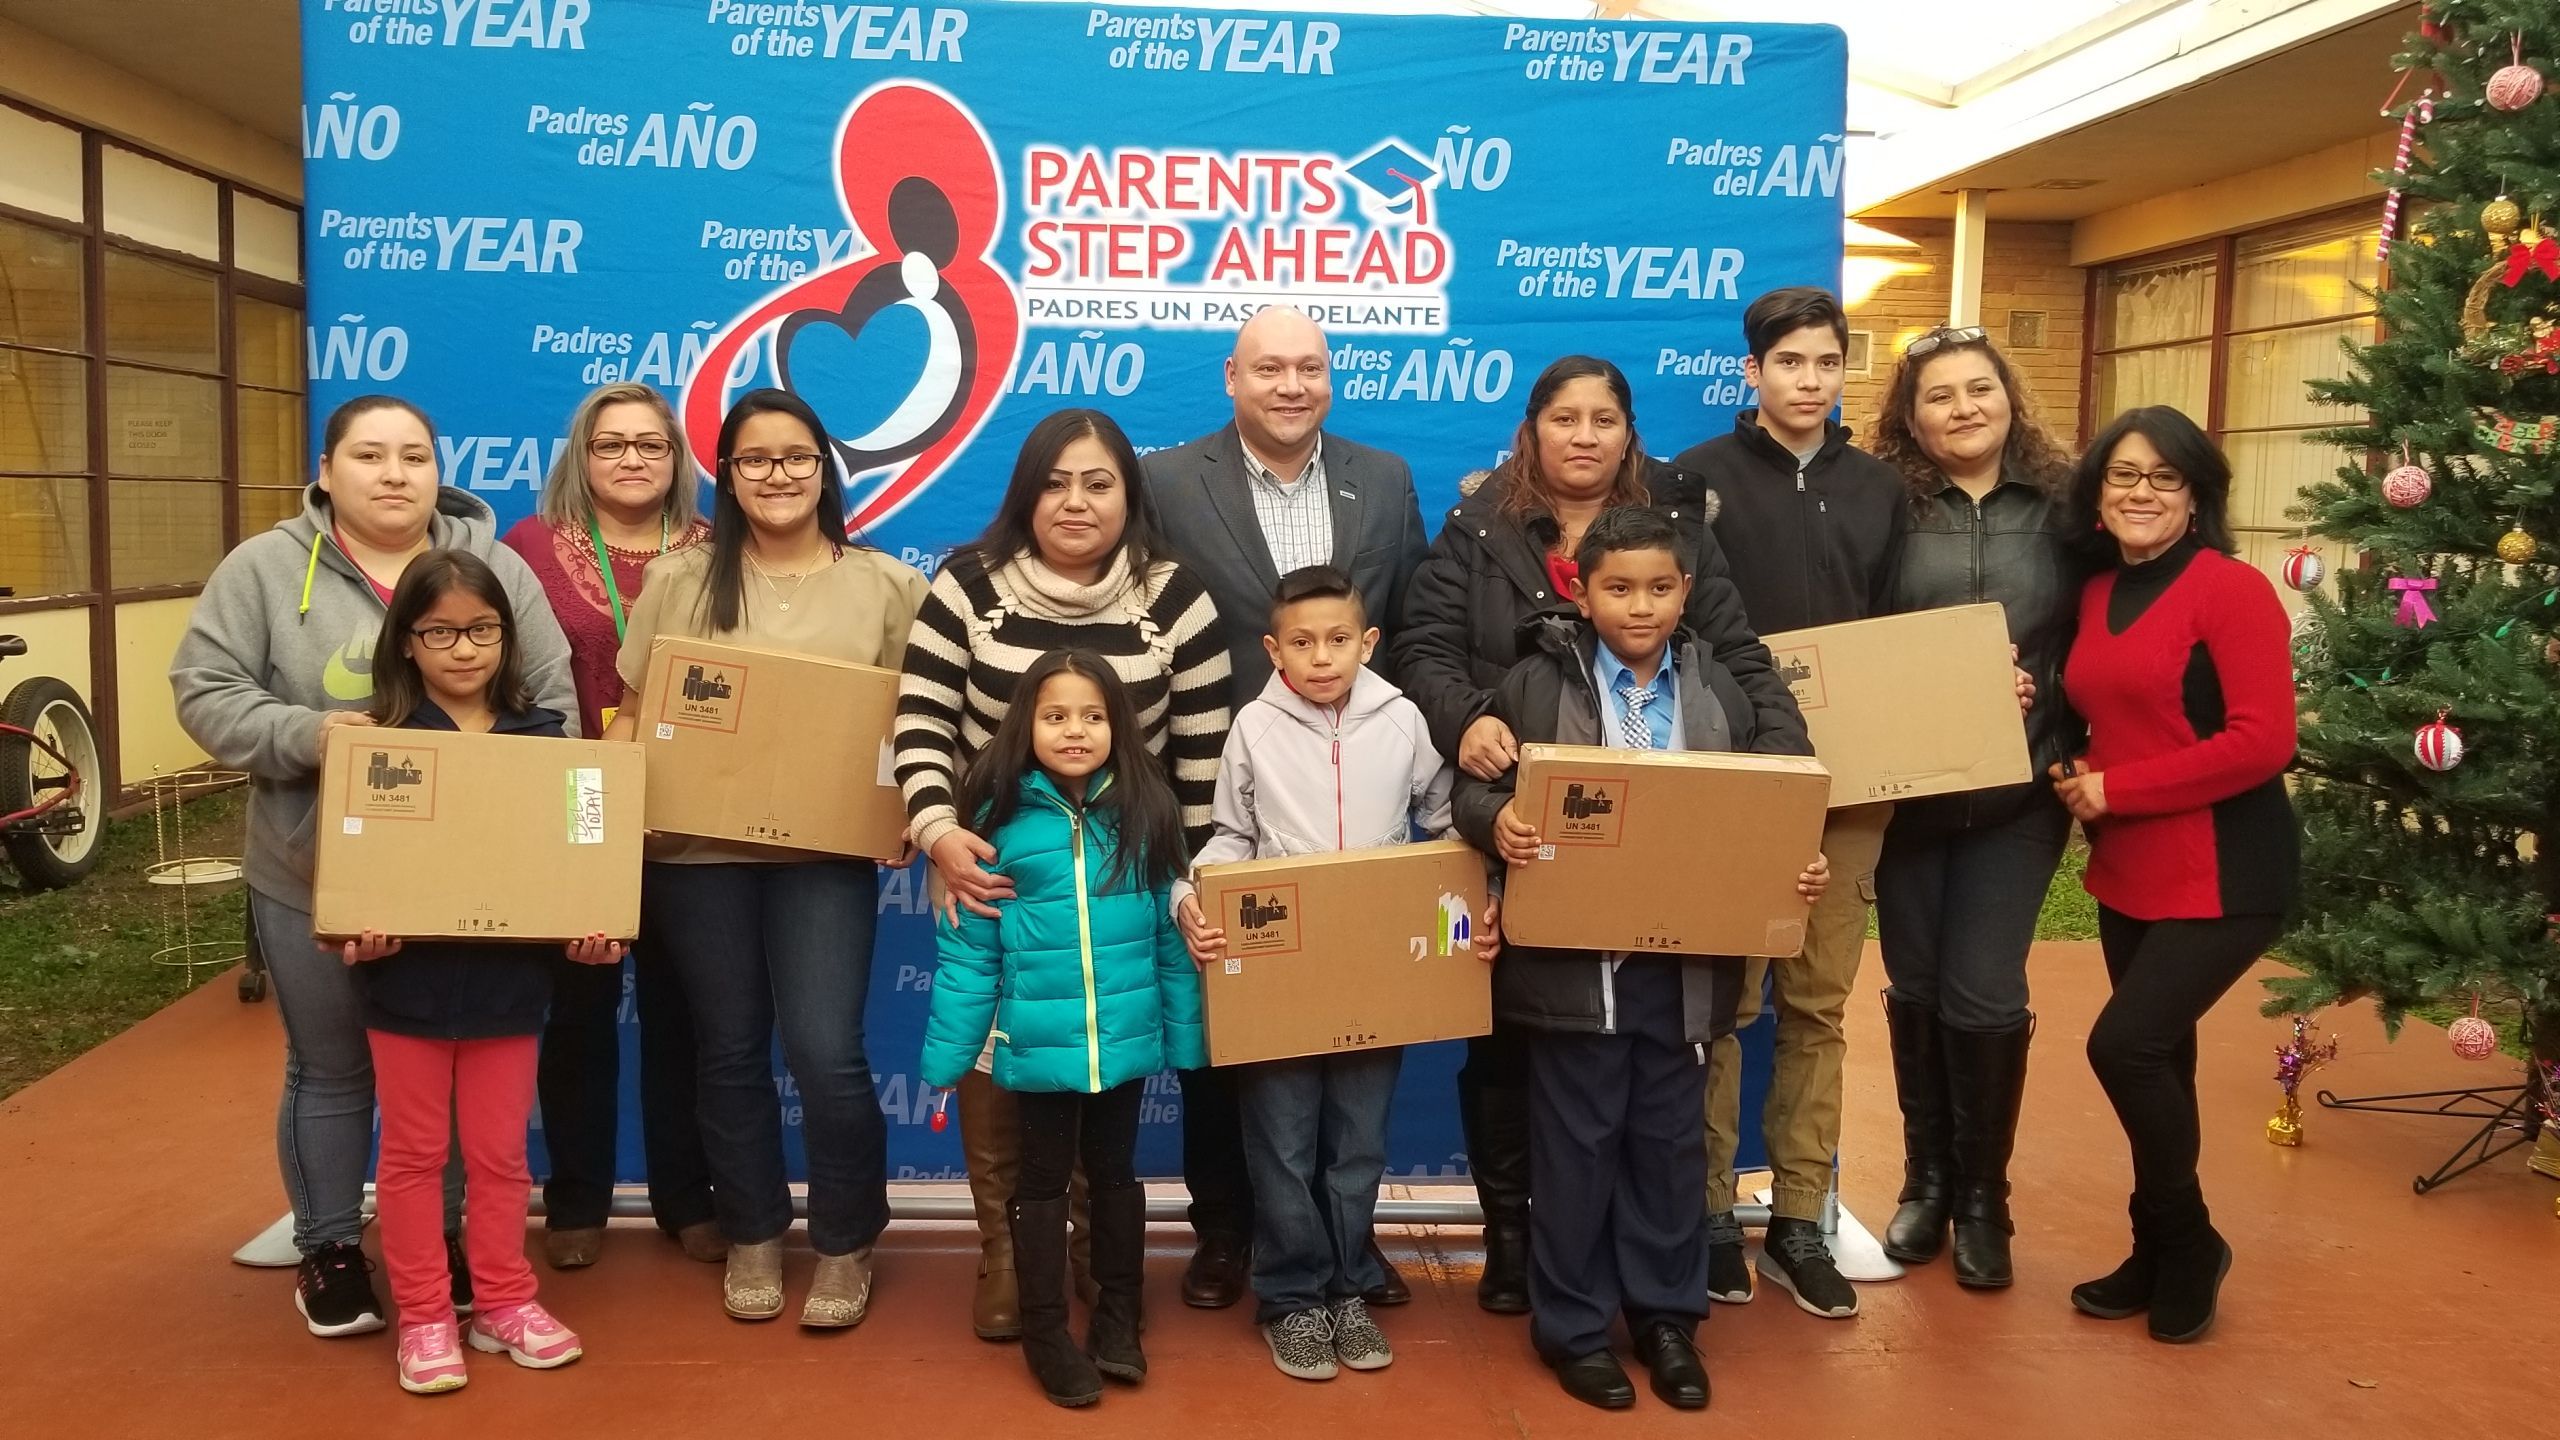 Jesse Cortez, Global Inclusion Effectiveness Lead at HPE celebrates with "Parents of the Year" and rewards students by donating laptops.